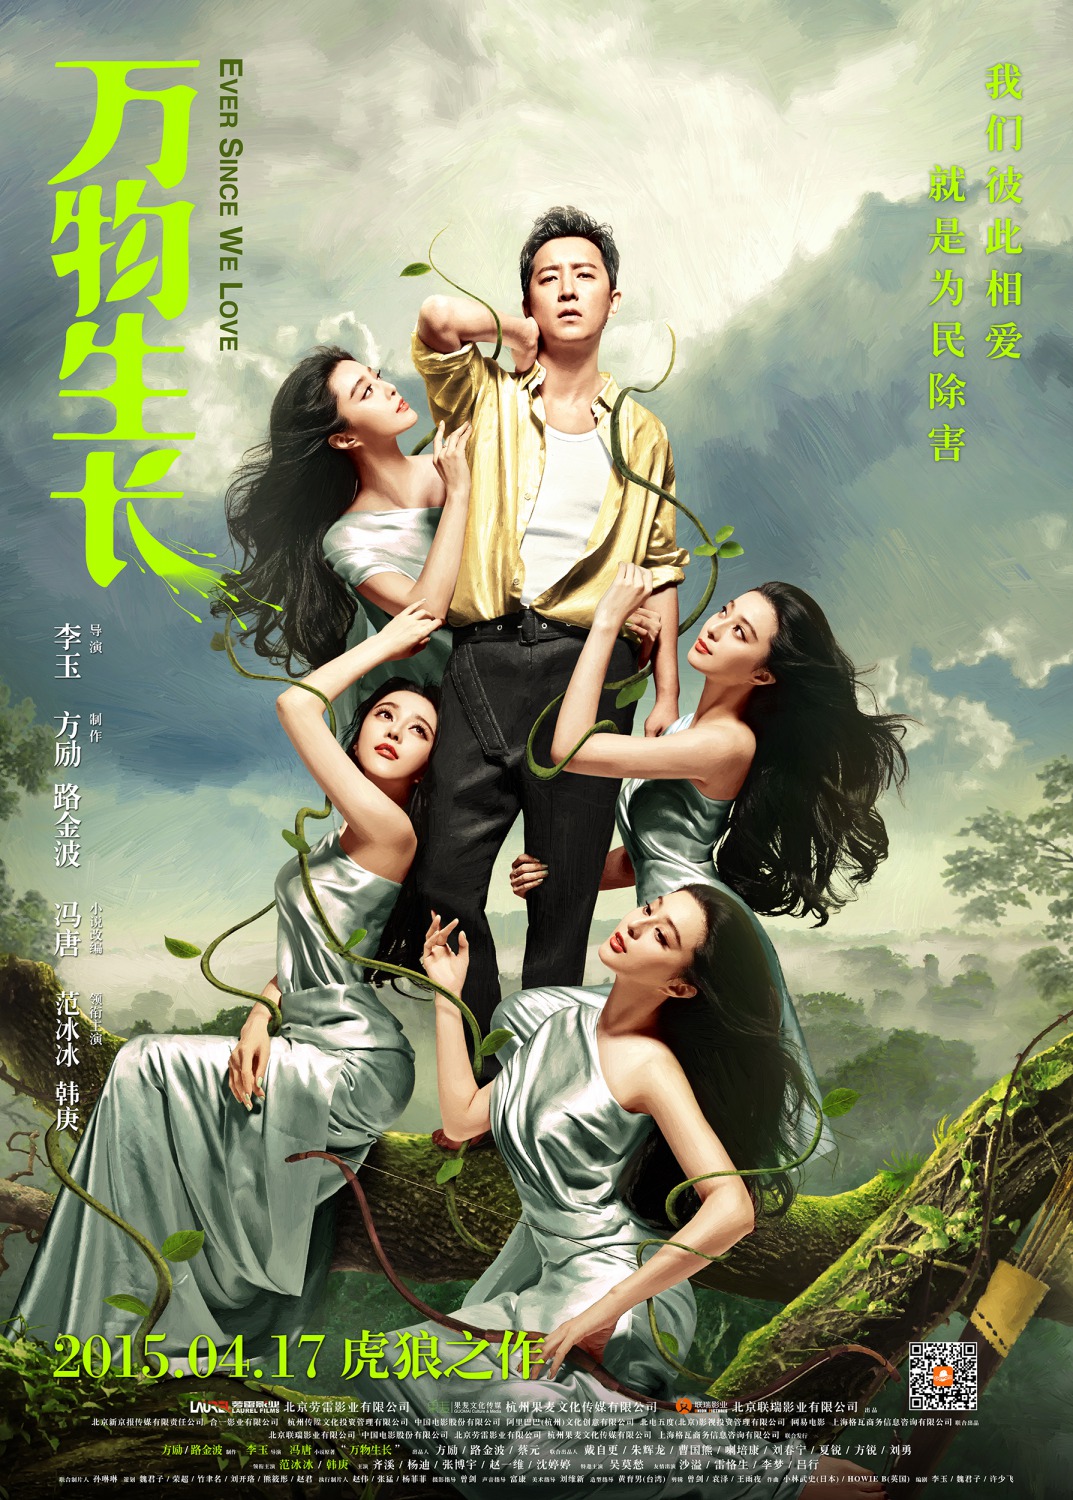 Extra Large Movie Poster Image for Wan Wu Sheng Zhang (#1 of 4)